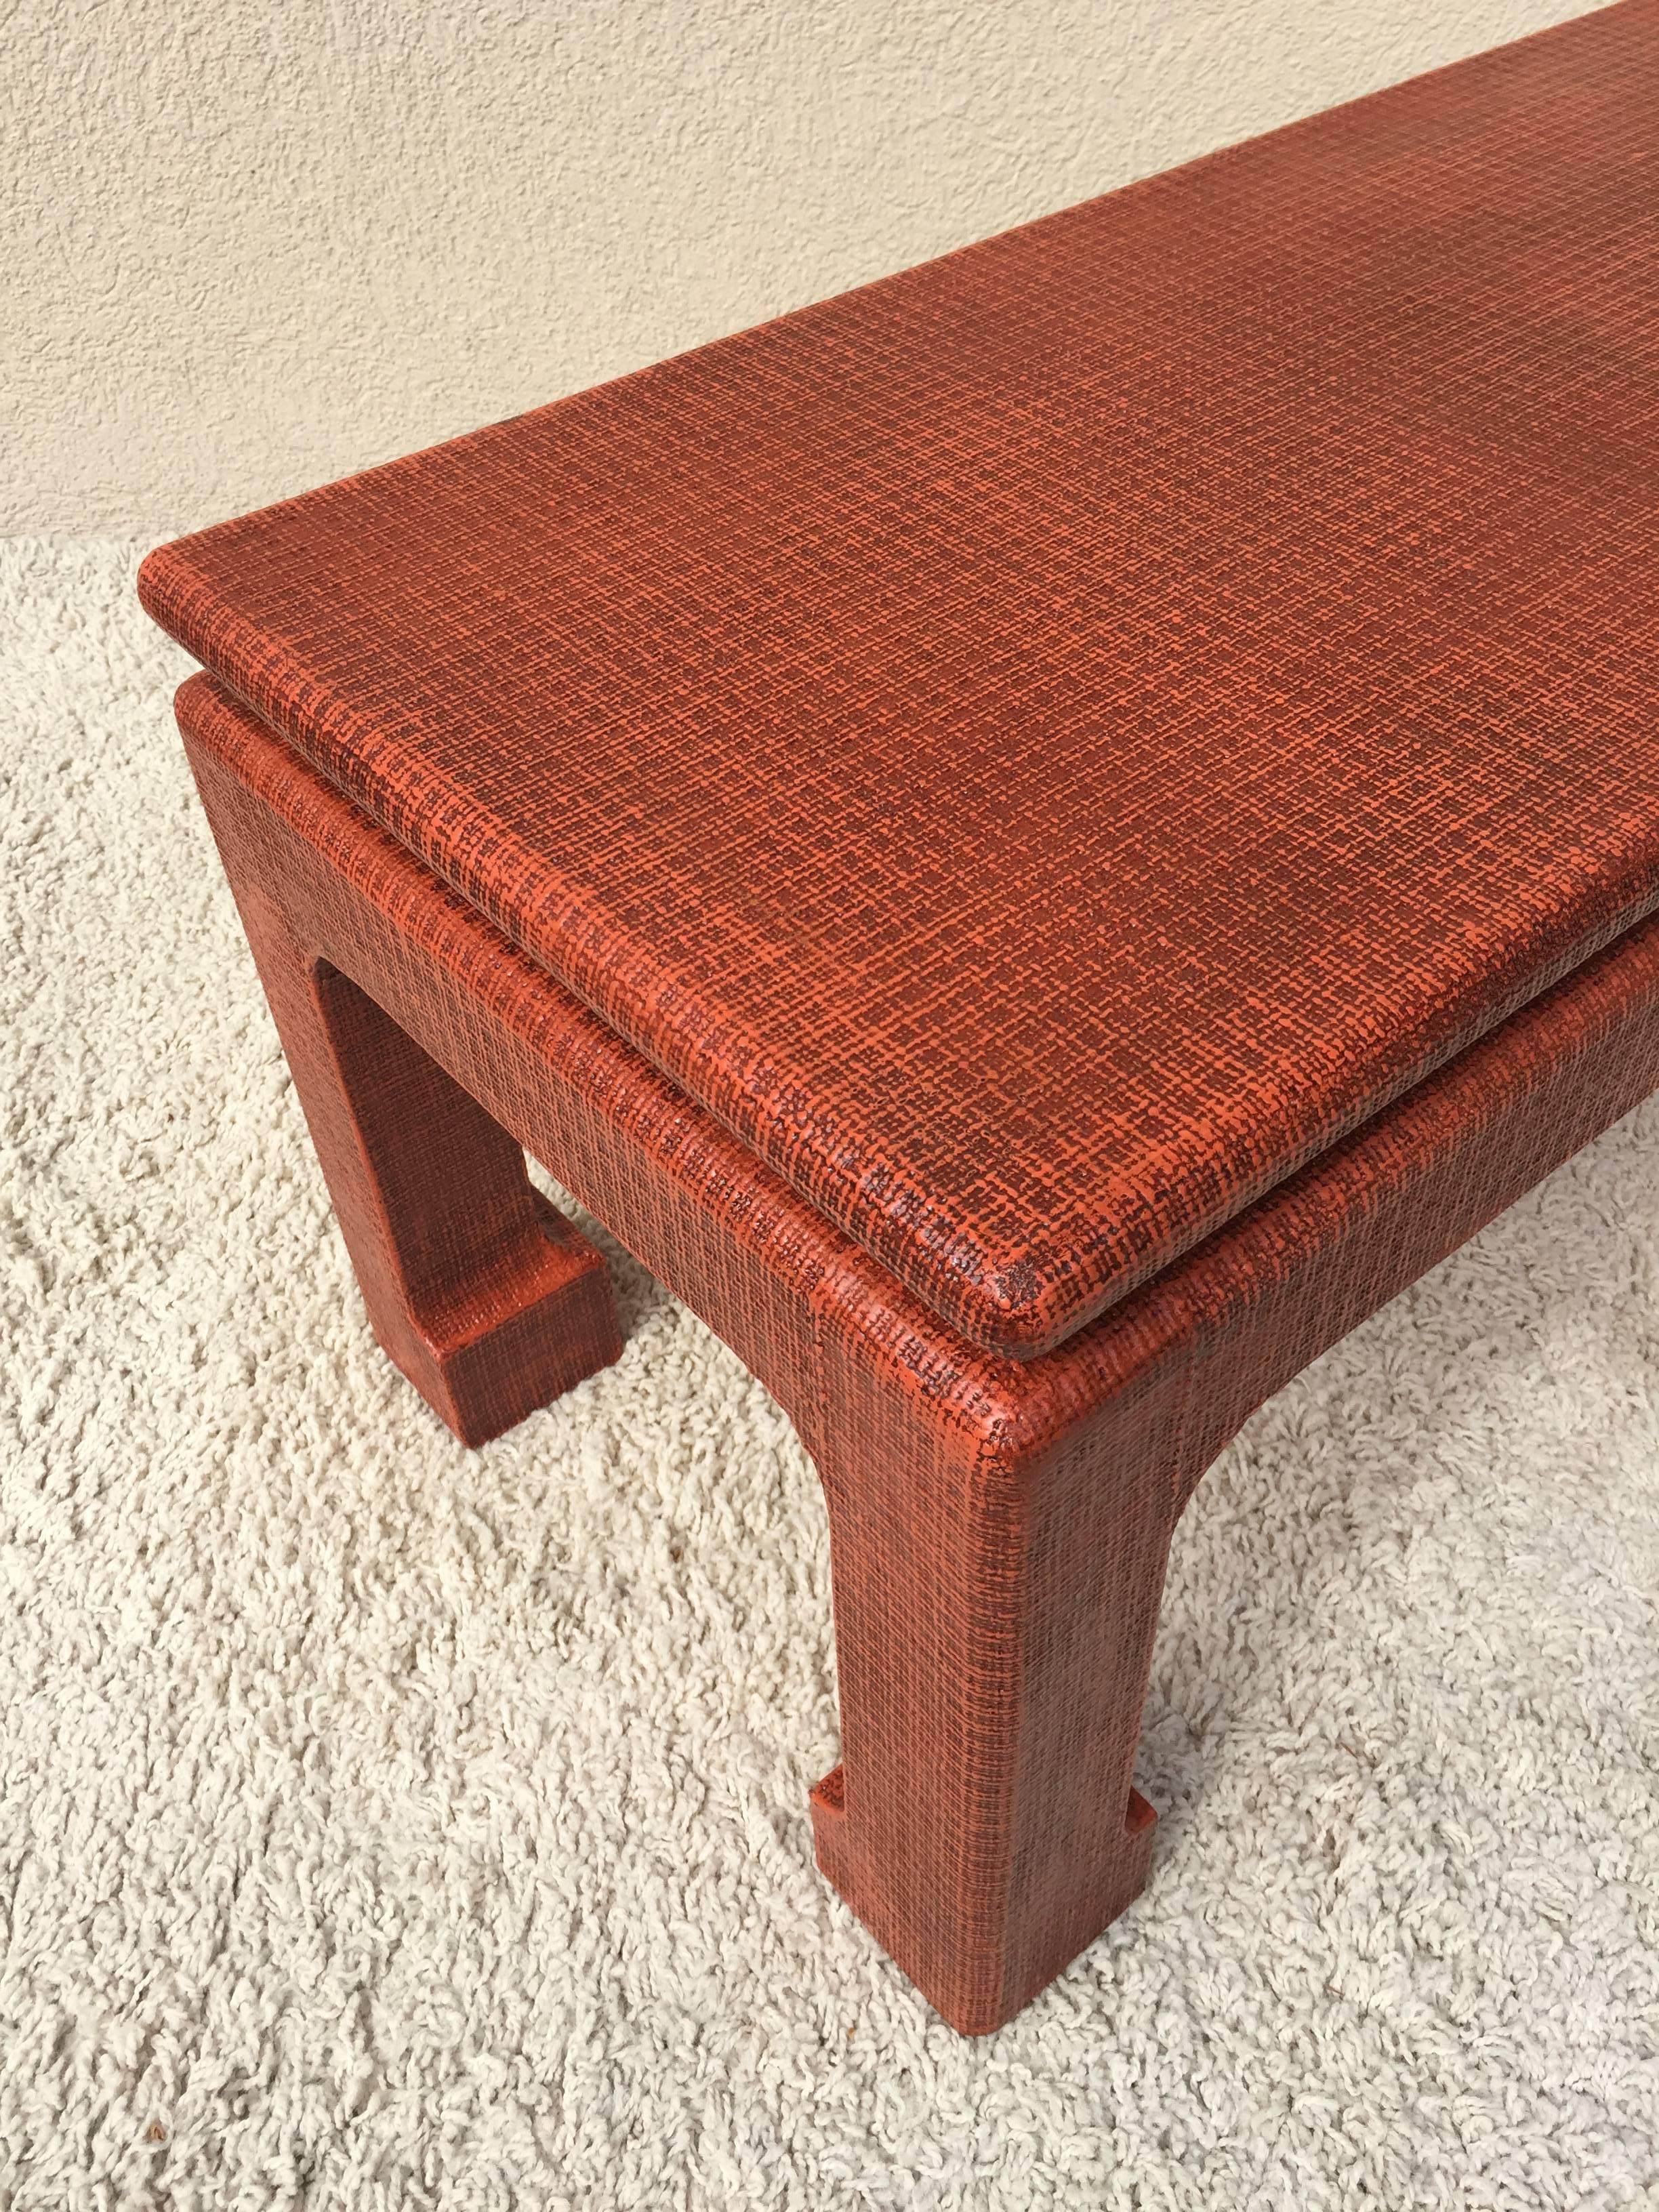 20th Century Karl Springer Style Grass Cloth Petite Table or Bench, Orange Lacquer For Sale